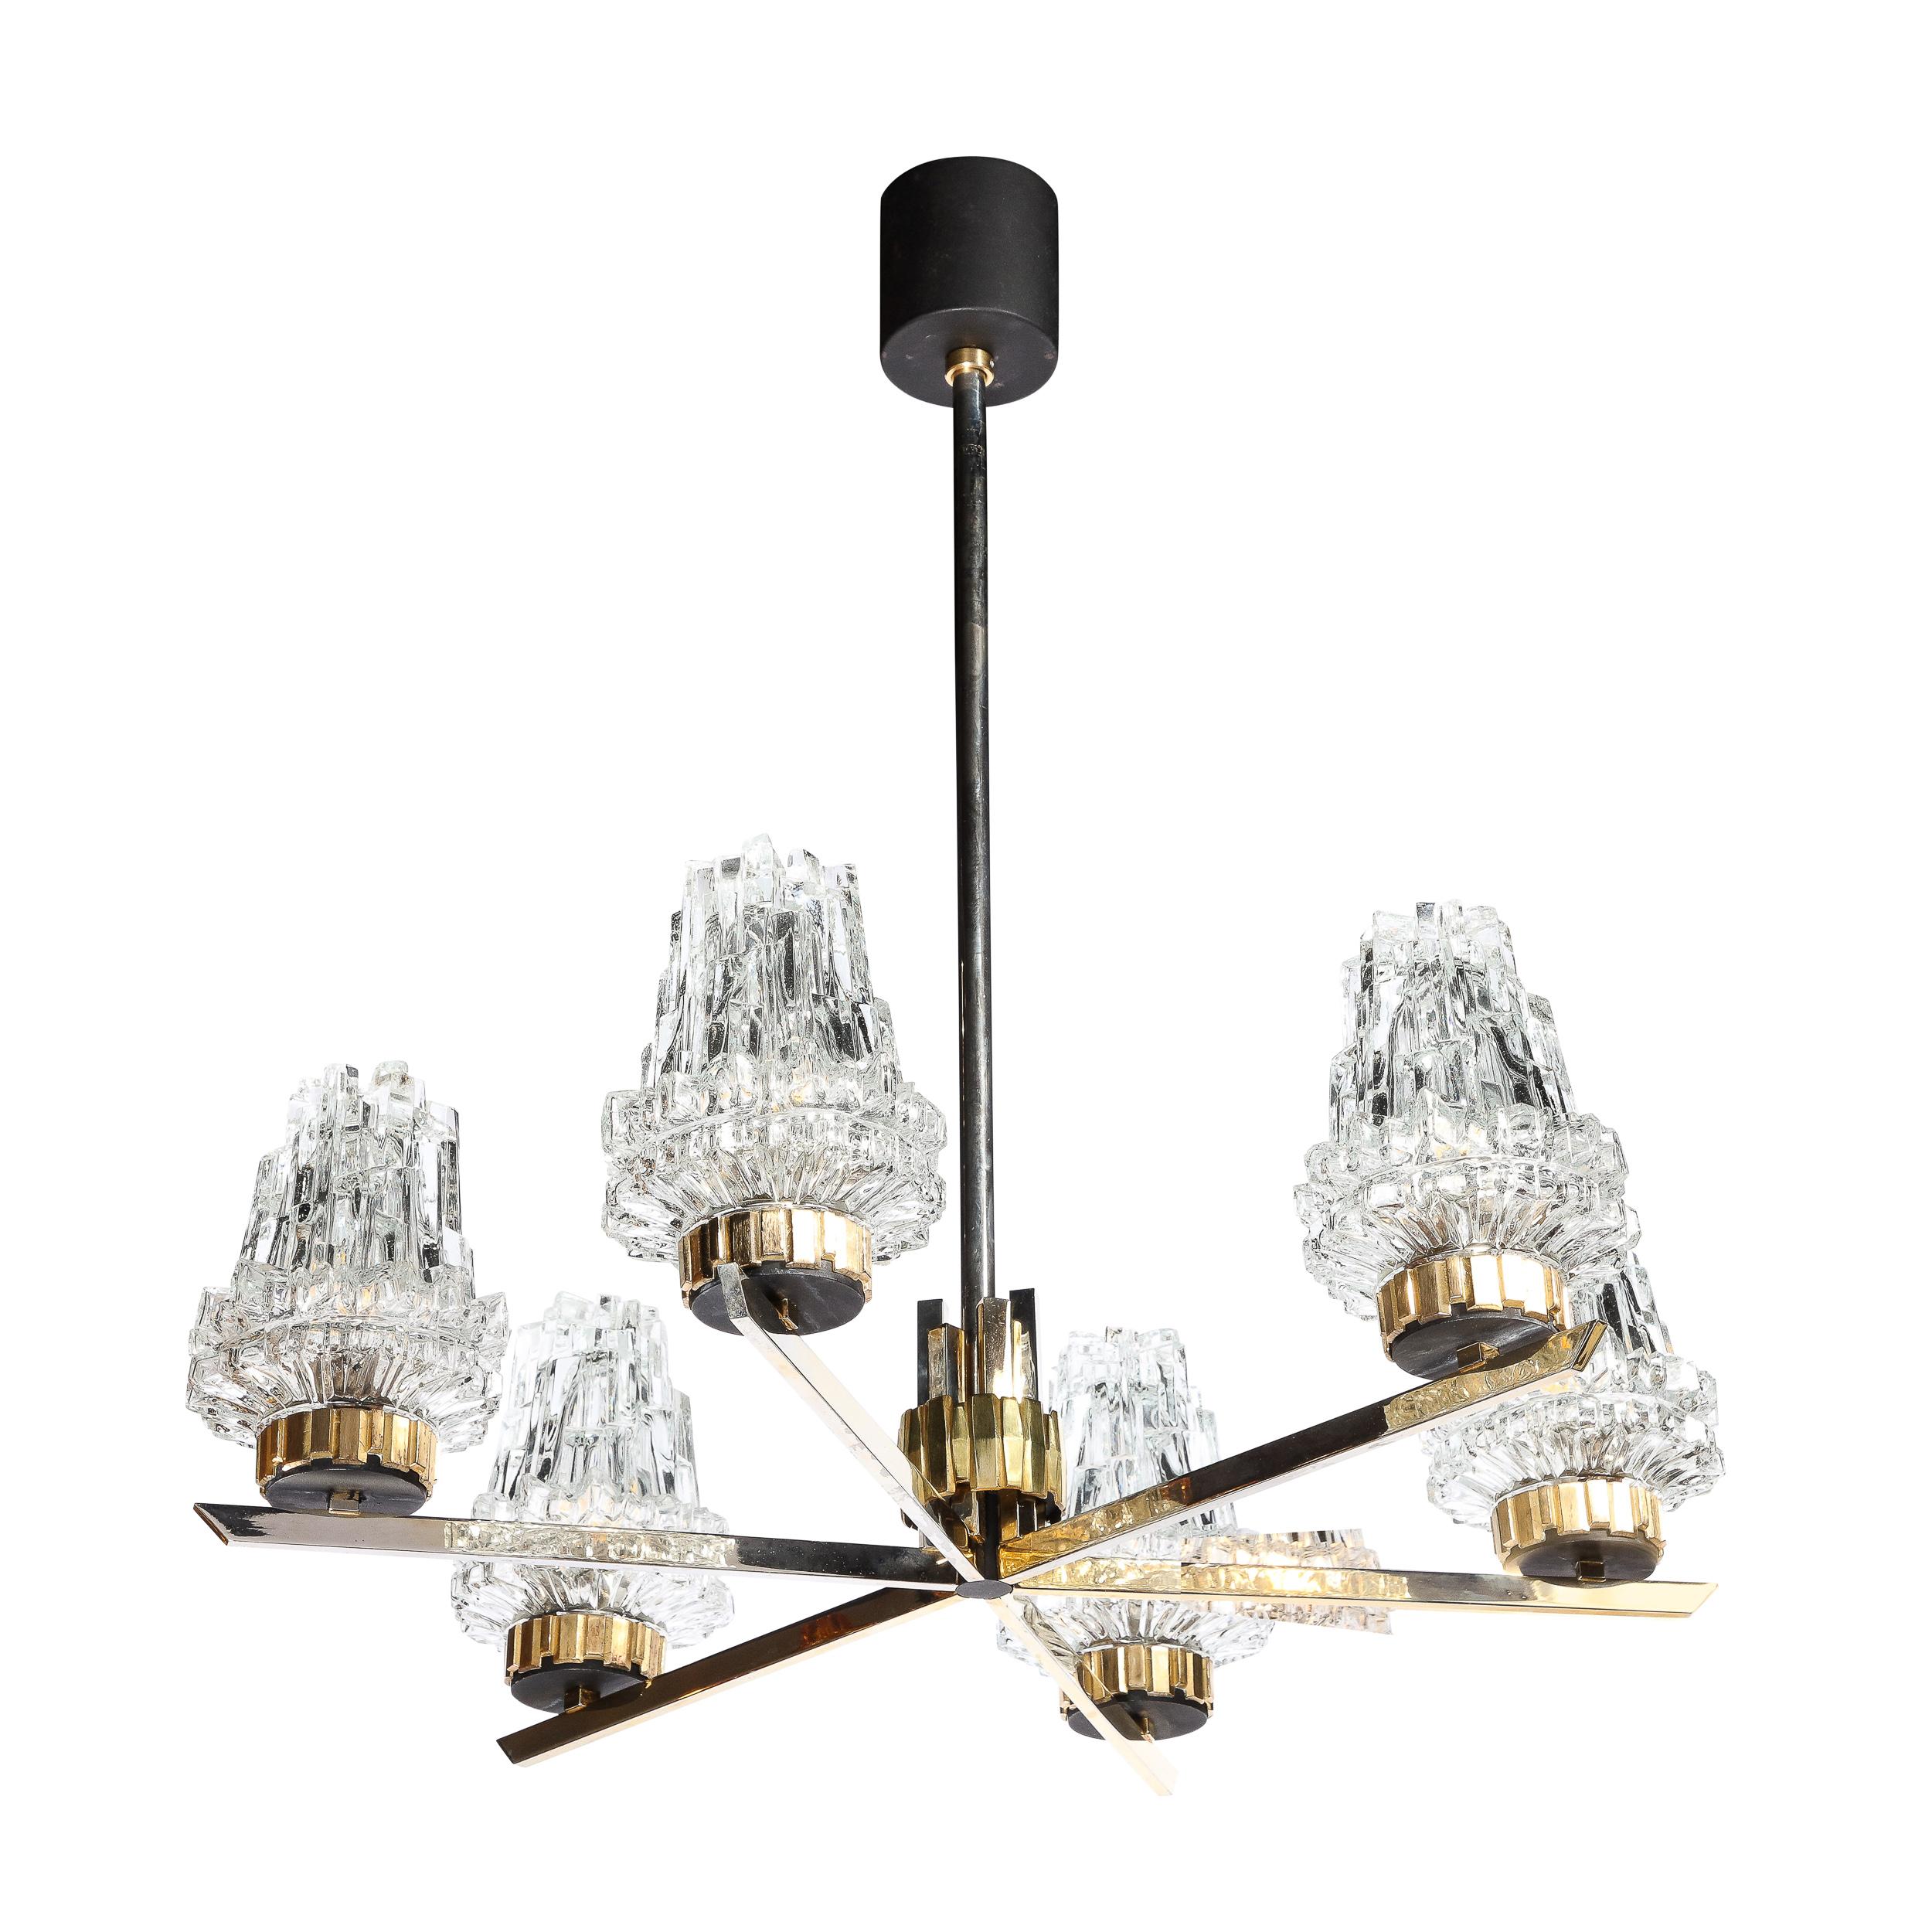 This highly unique and materially dynamic Mid-Century Modernist Chandelier with Cubist Glass Shades and Crennelated Brass Fittings originates from Italy, Circa 1960. With cohesive design elements and repeated geometric motifs throughout the piece,